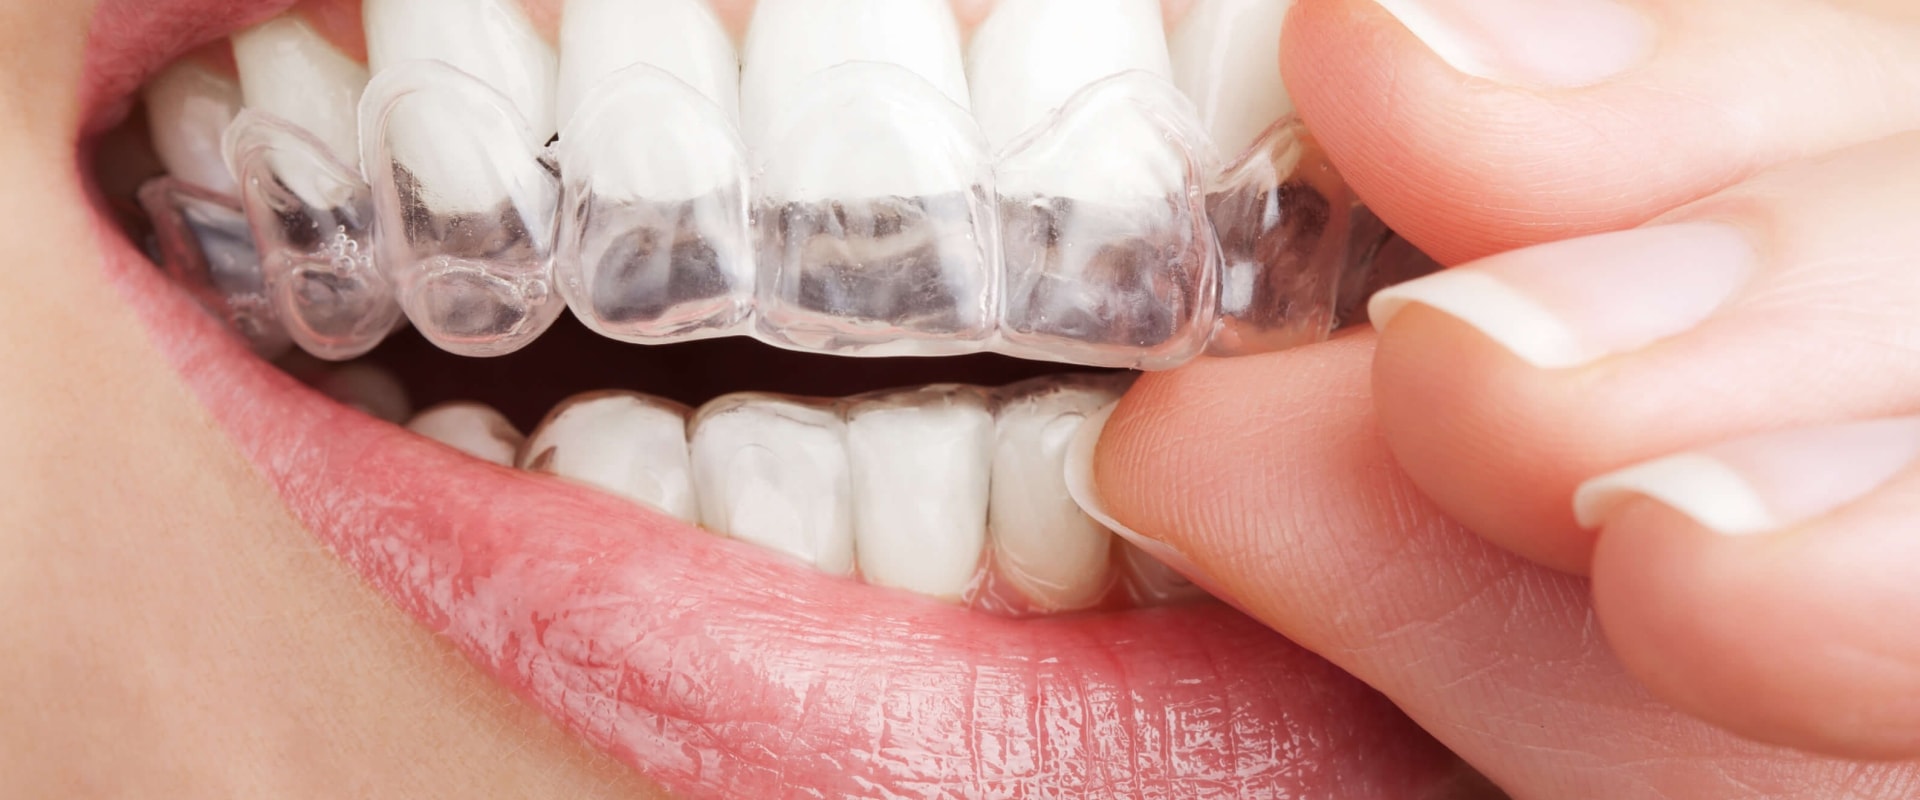 Does invisalign give better results?